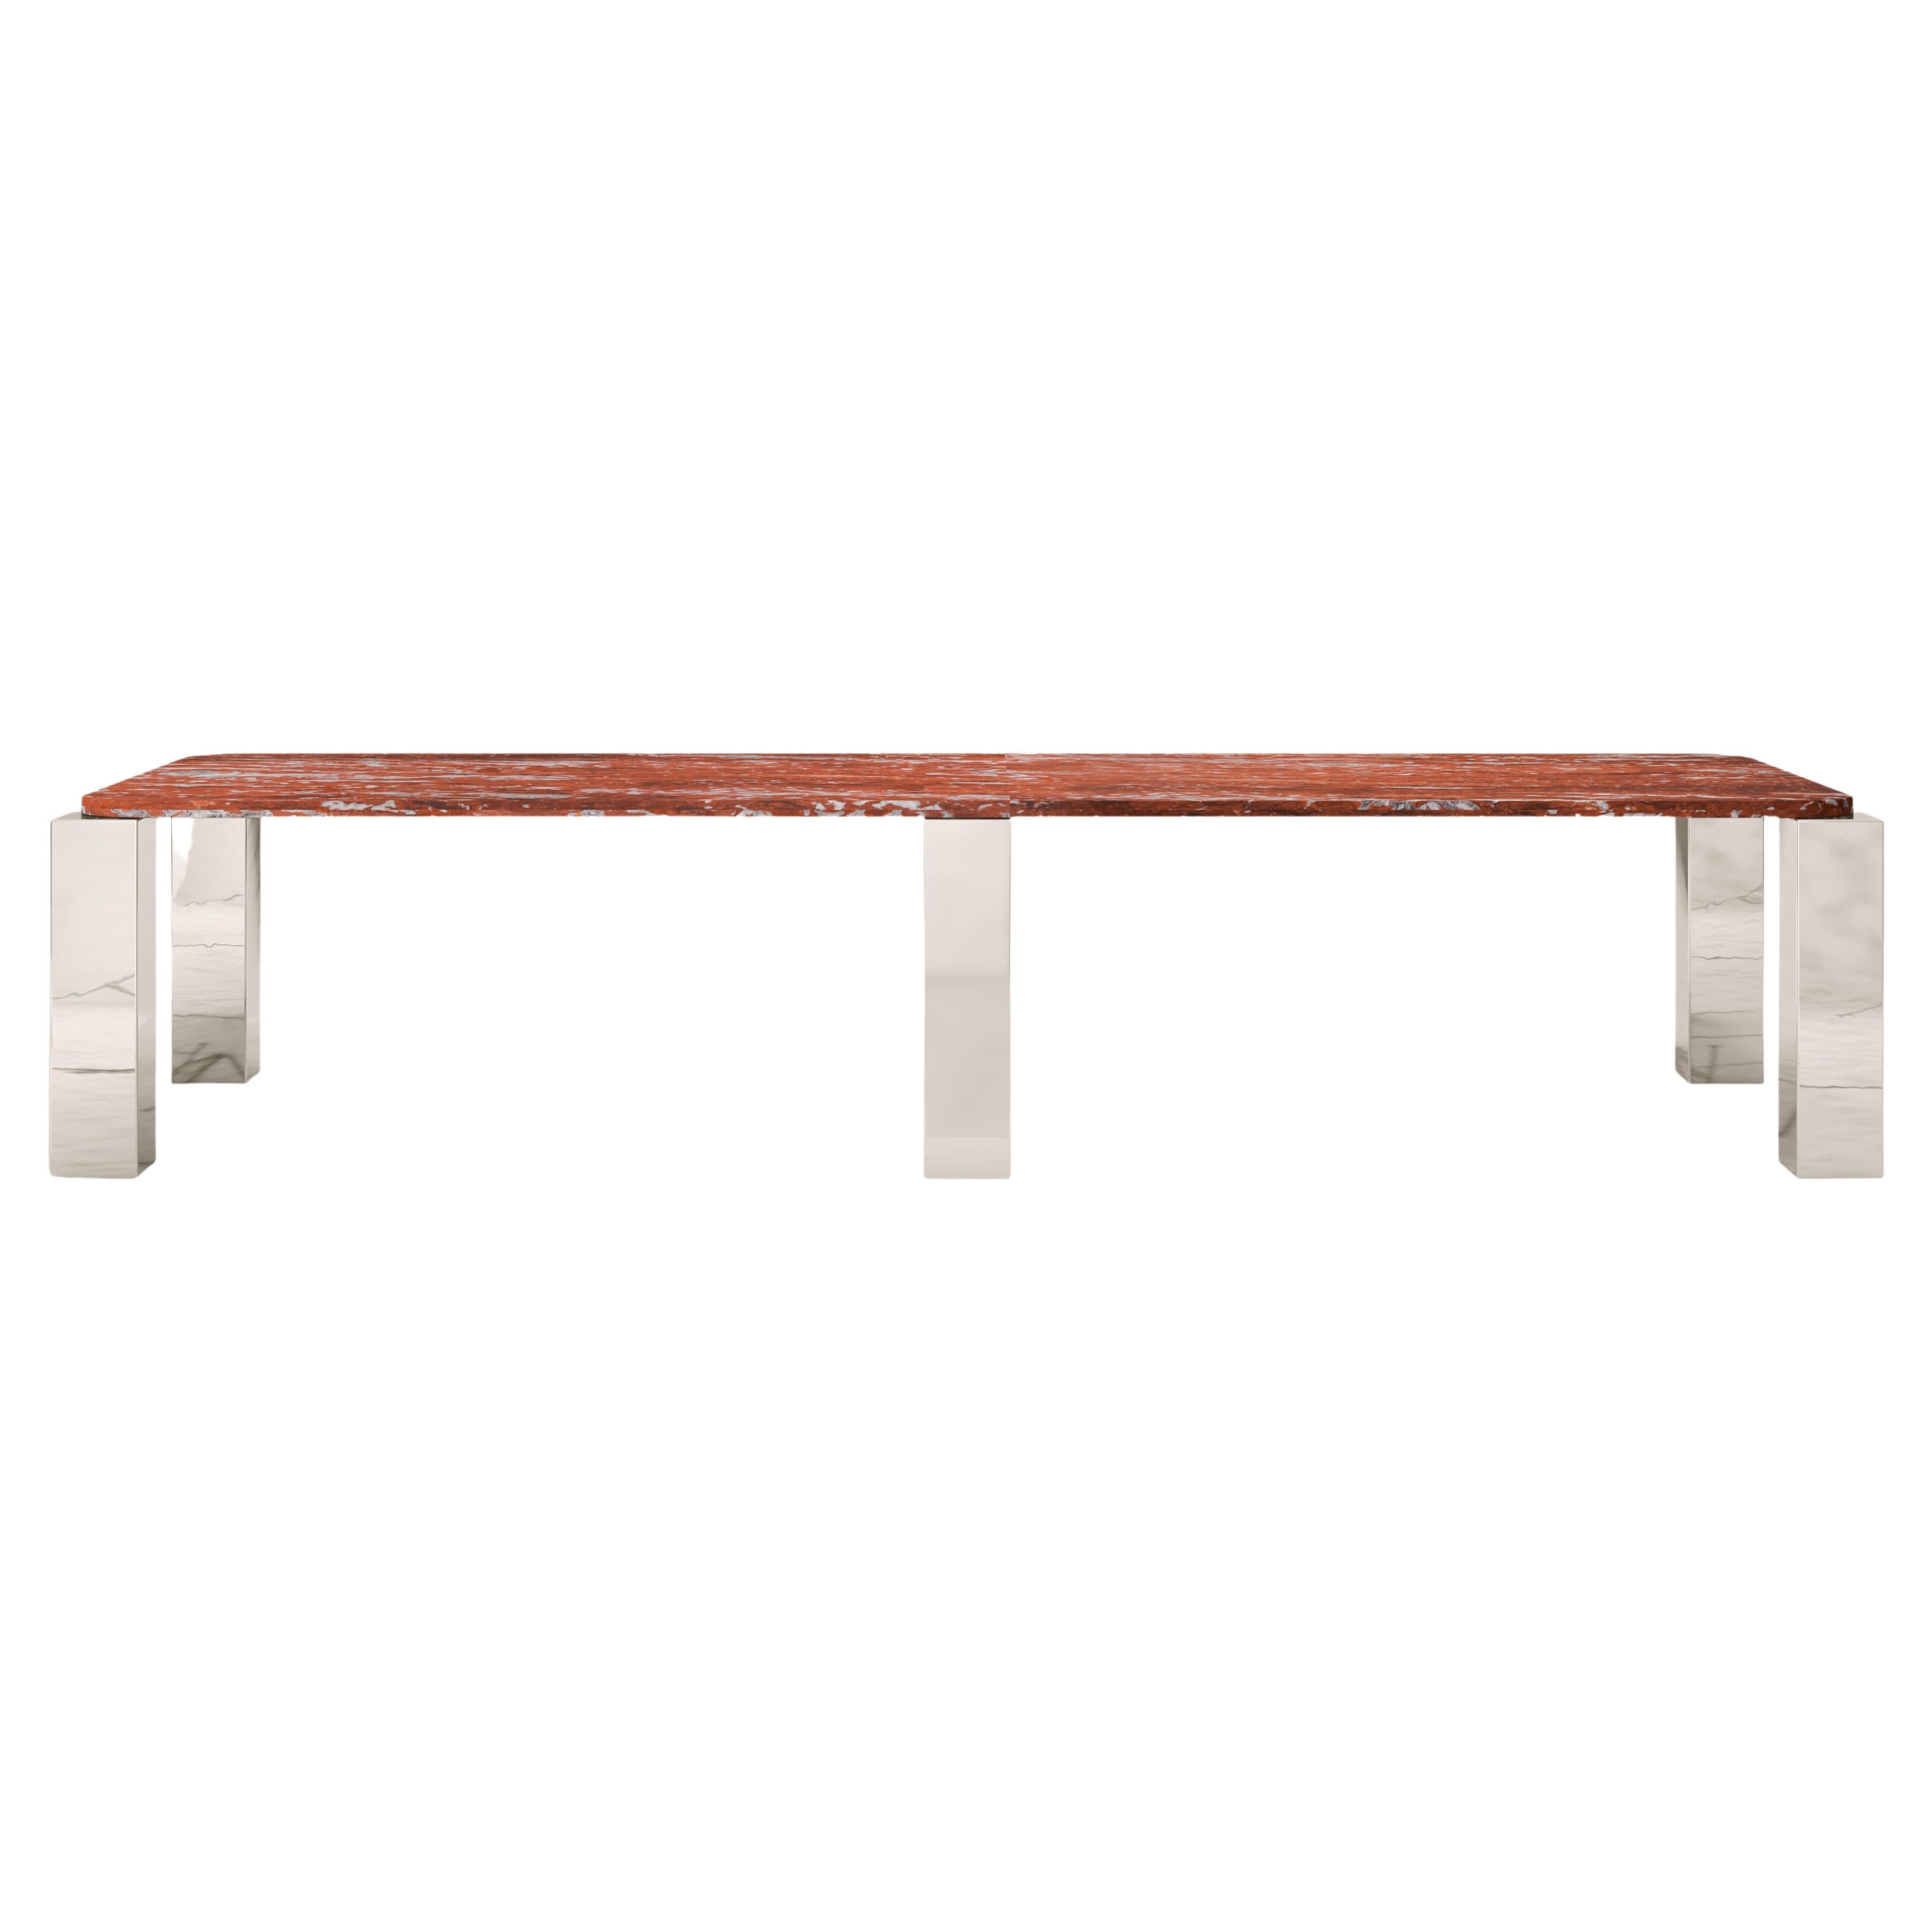 FORM(LA) Cubo Rectangle Dining Table 146”L x 50”W x 30”H Francia Marble & Chrome For Sale